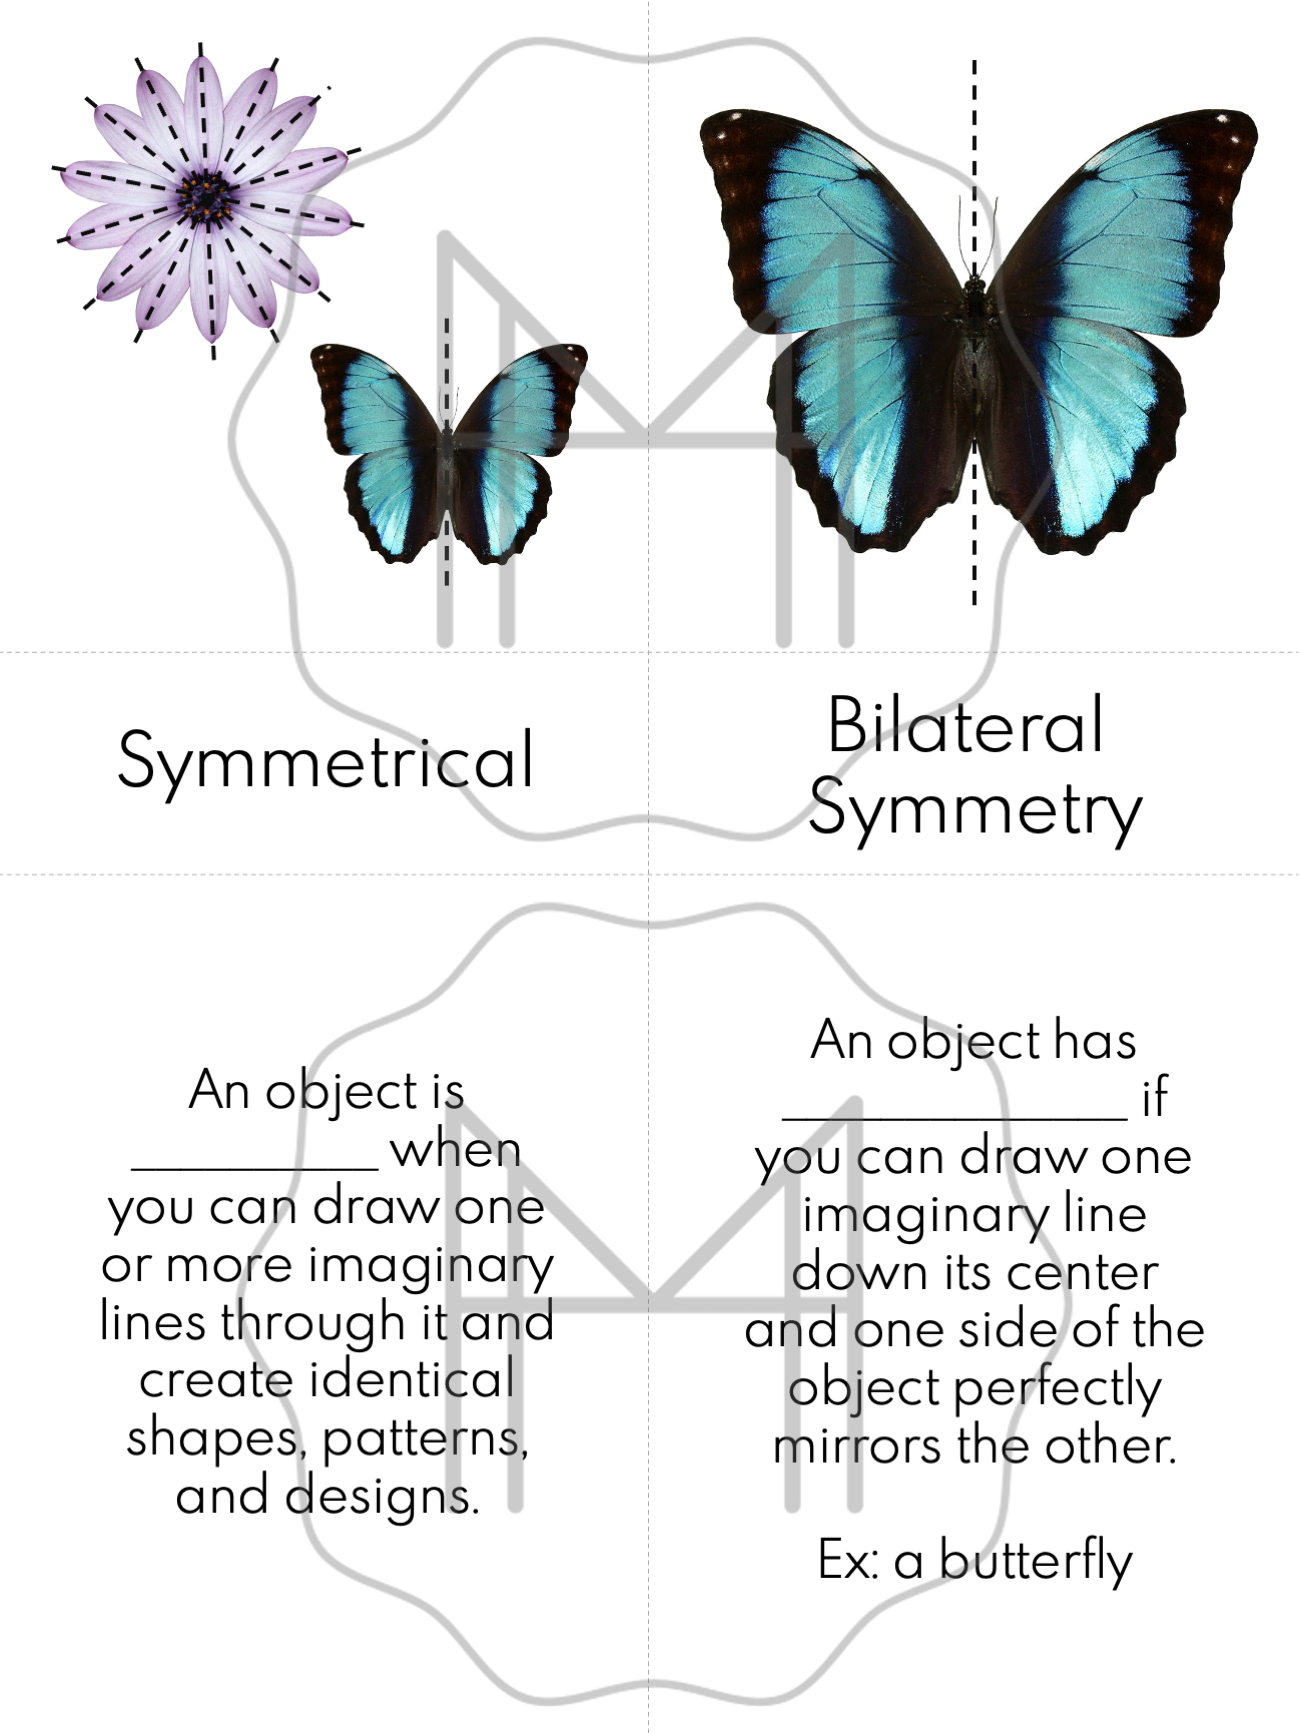 Finding Symmetry in Nature